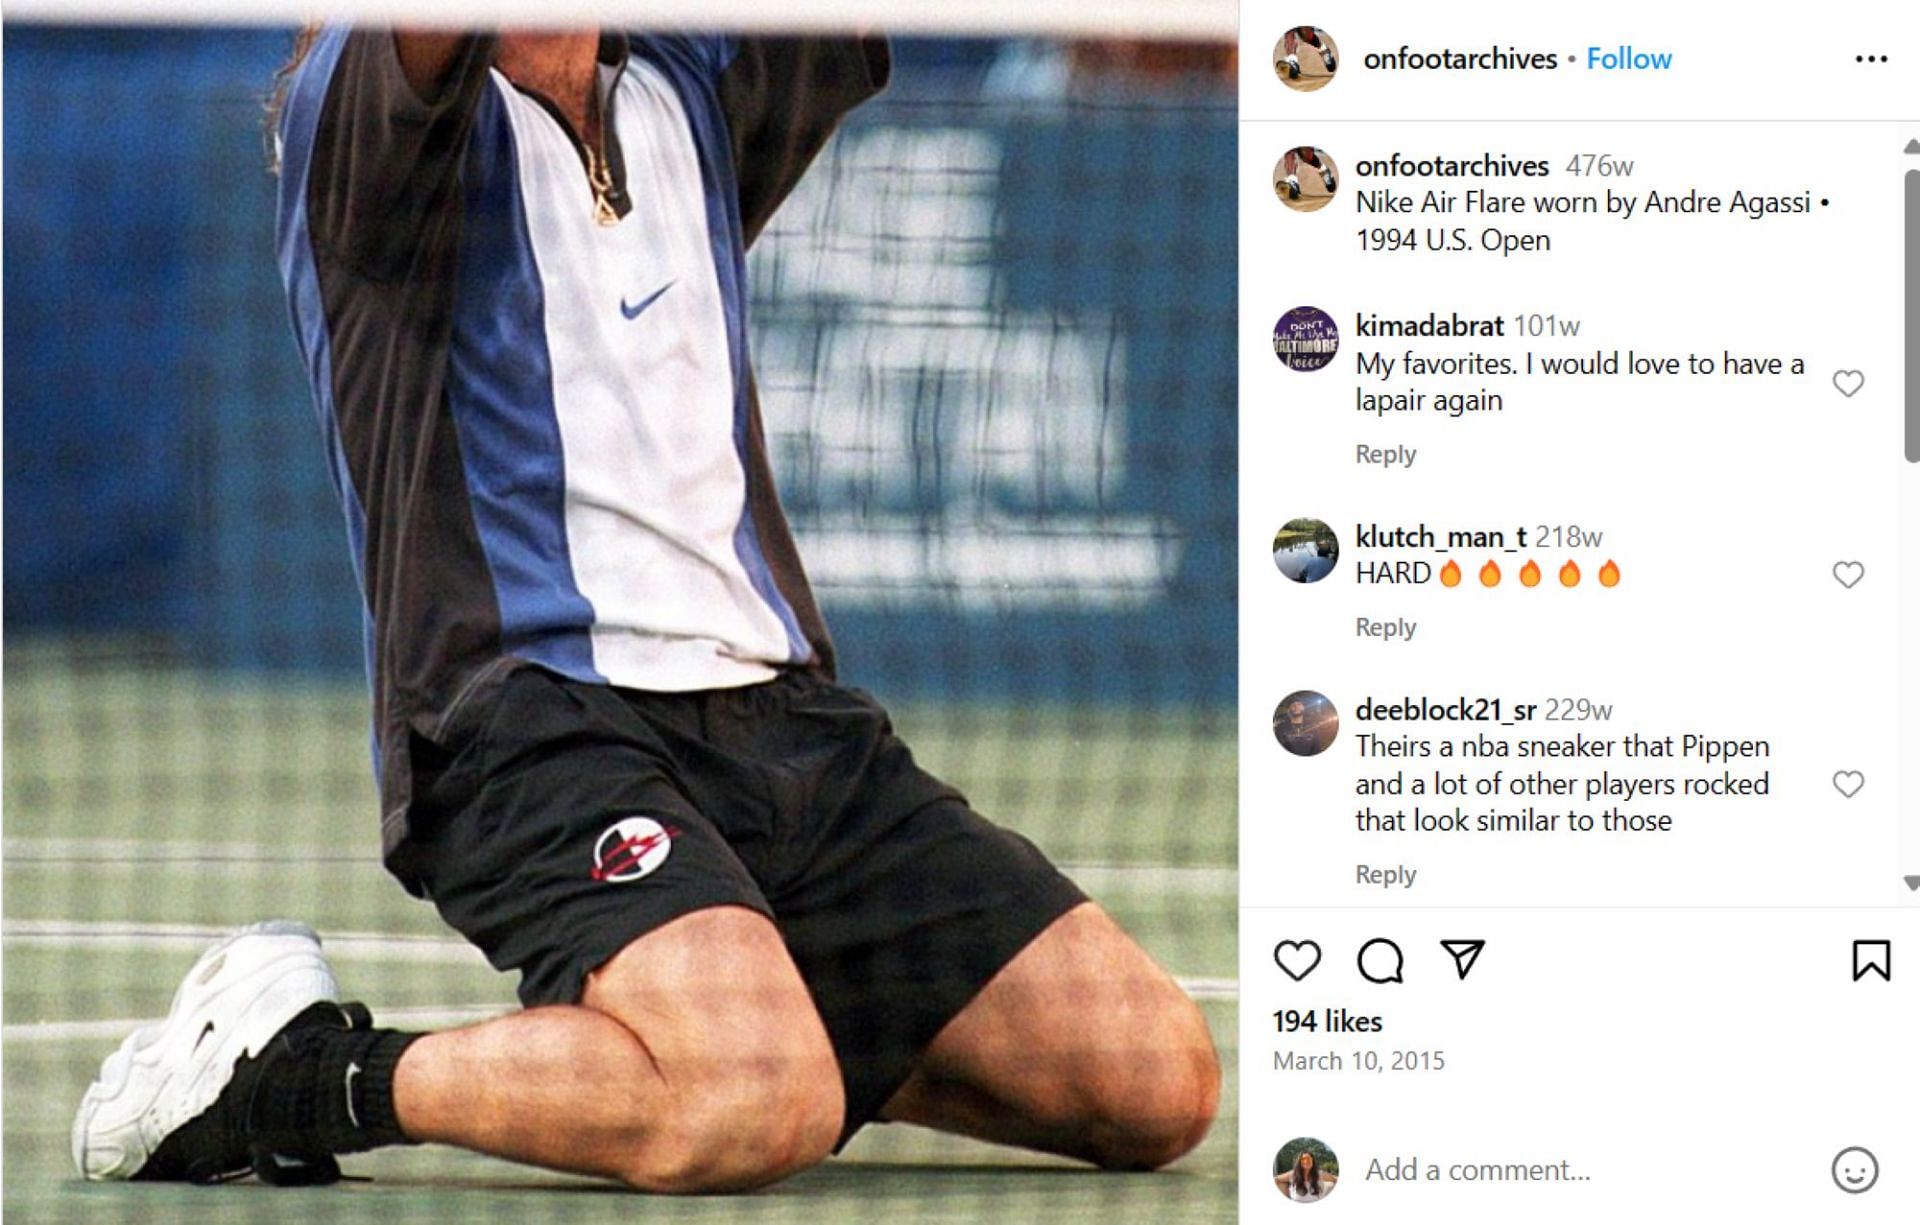 Screengrab from onfootarchive&#039;s Instagram